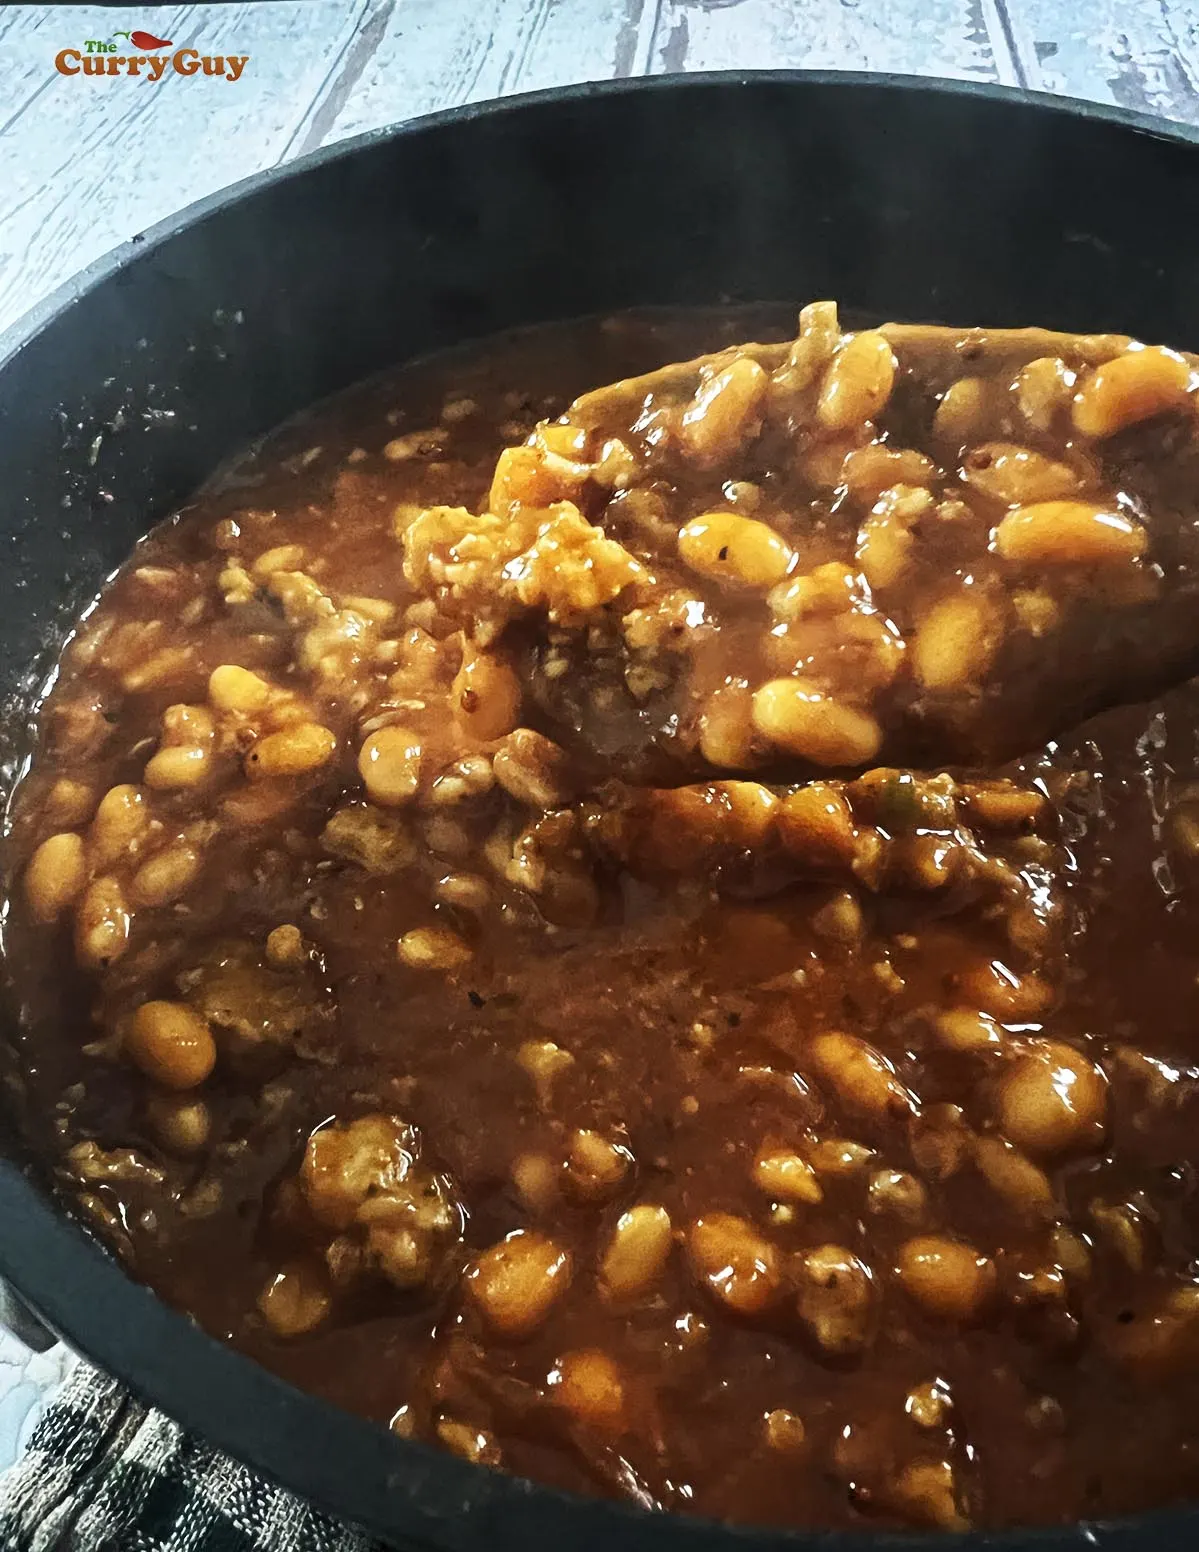 The finished barbecued baked beans.